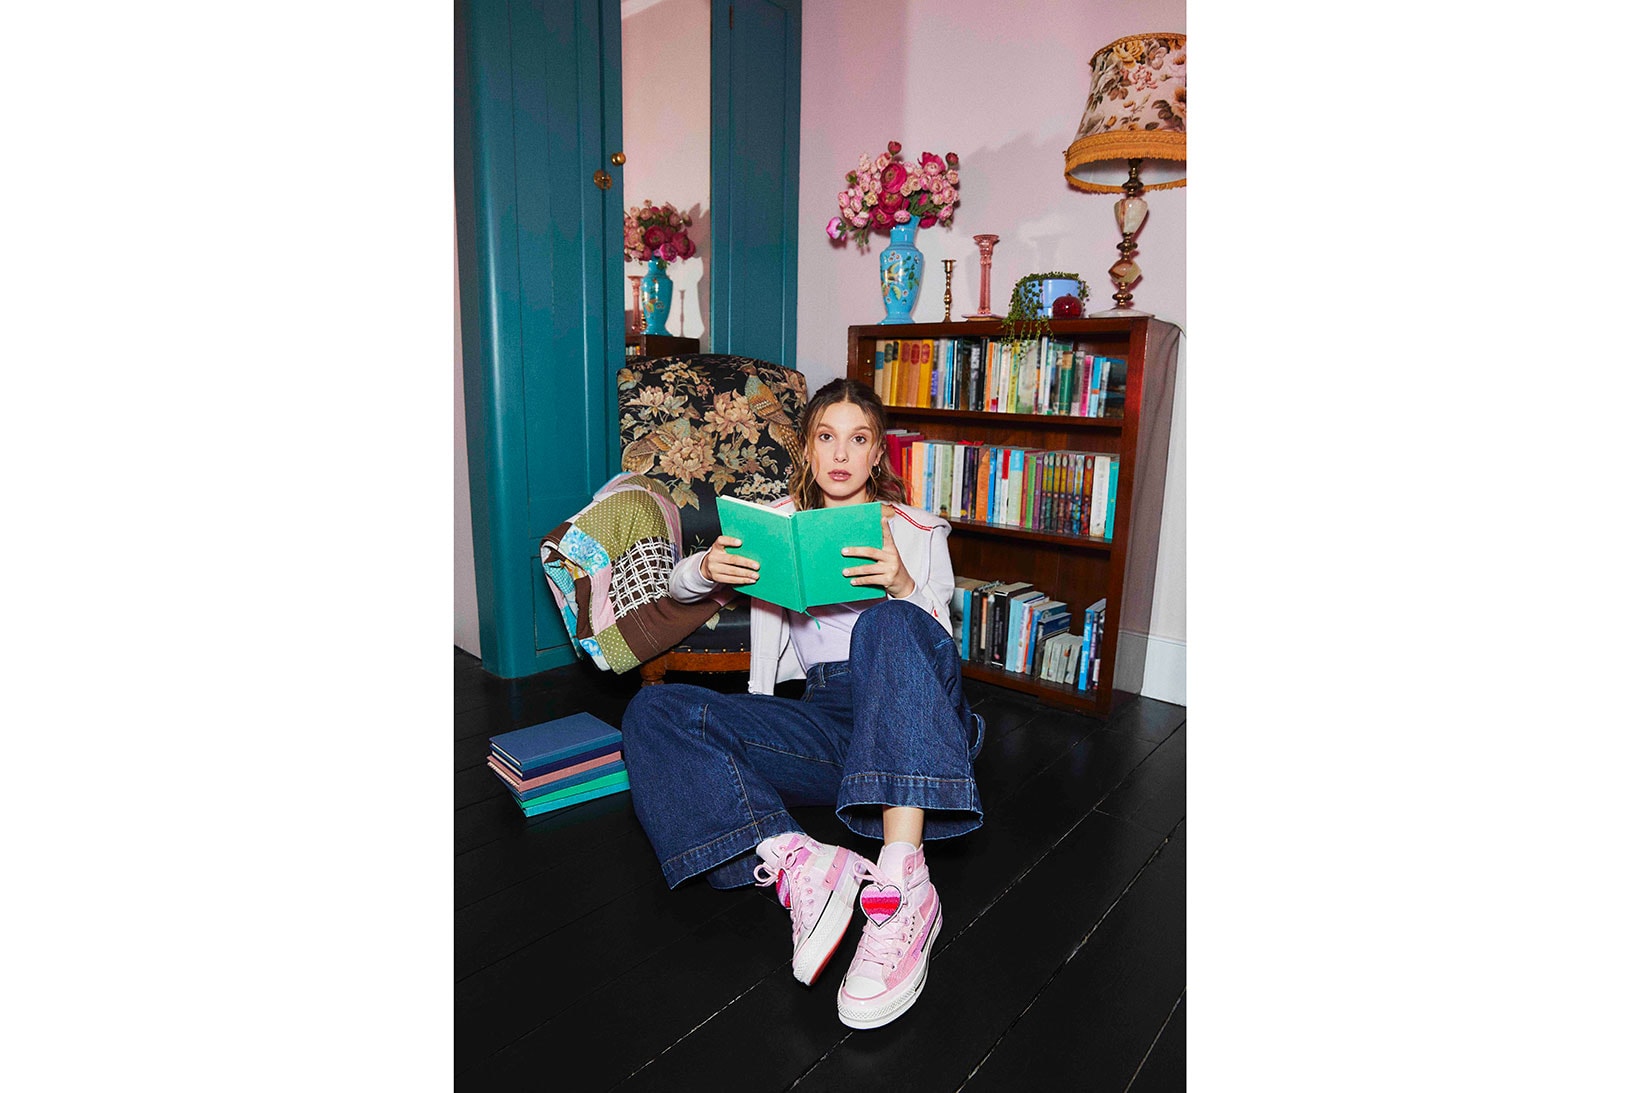 converse millie bobby brown collaboration chuck taylor chuck 70 sneakers black pink white stranger things actress shoes footwear